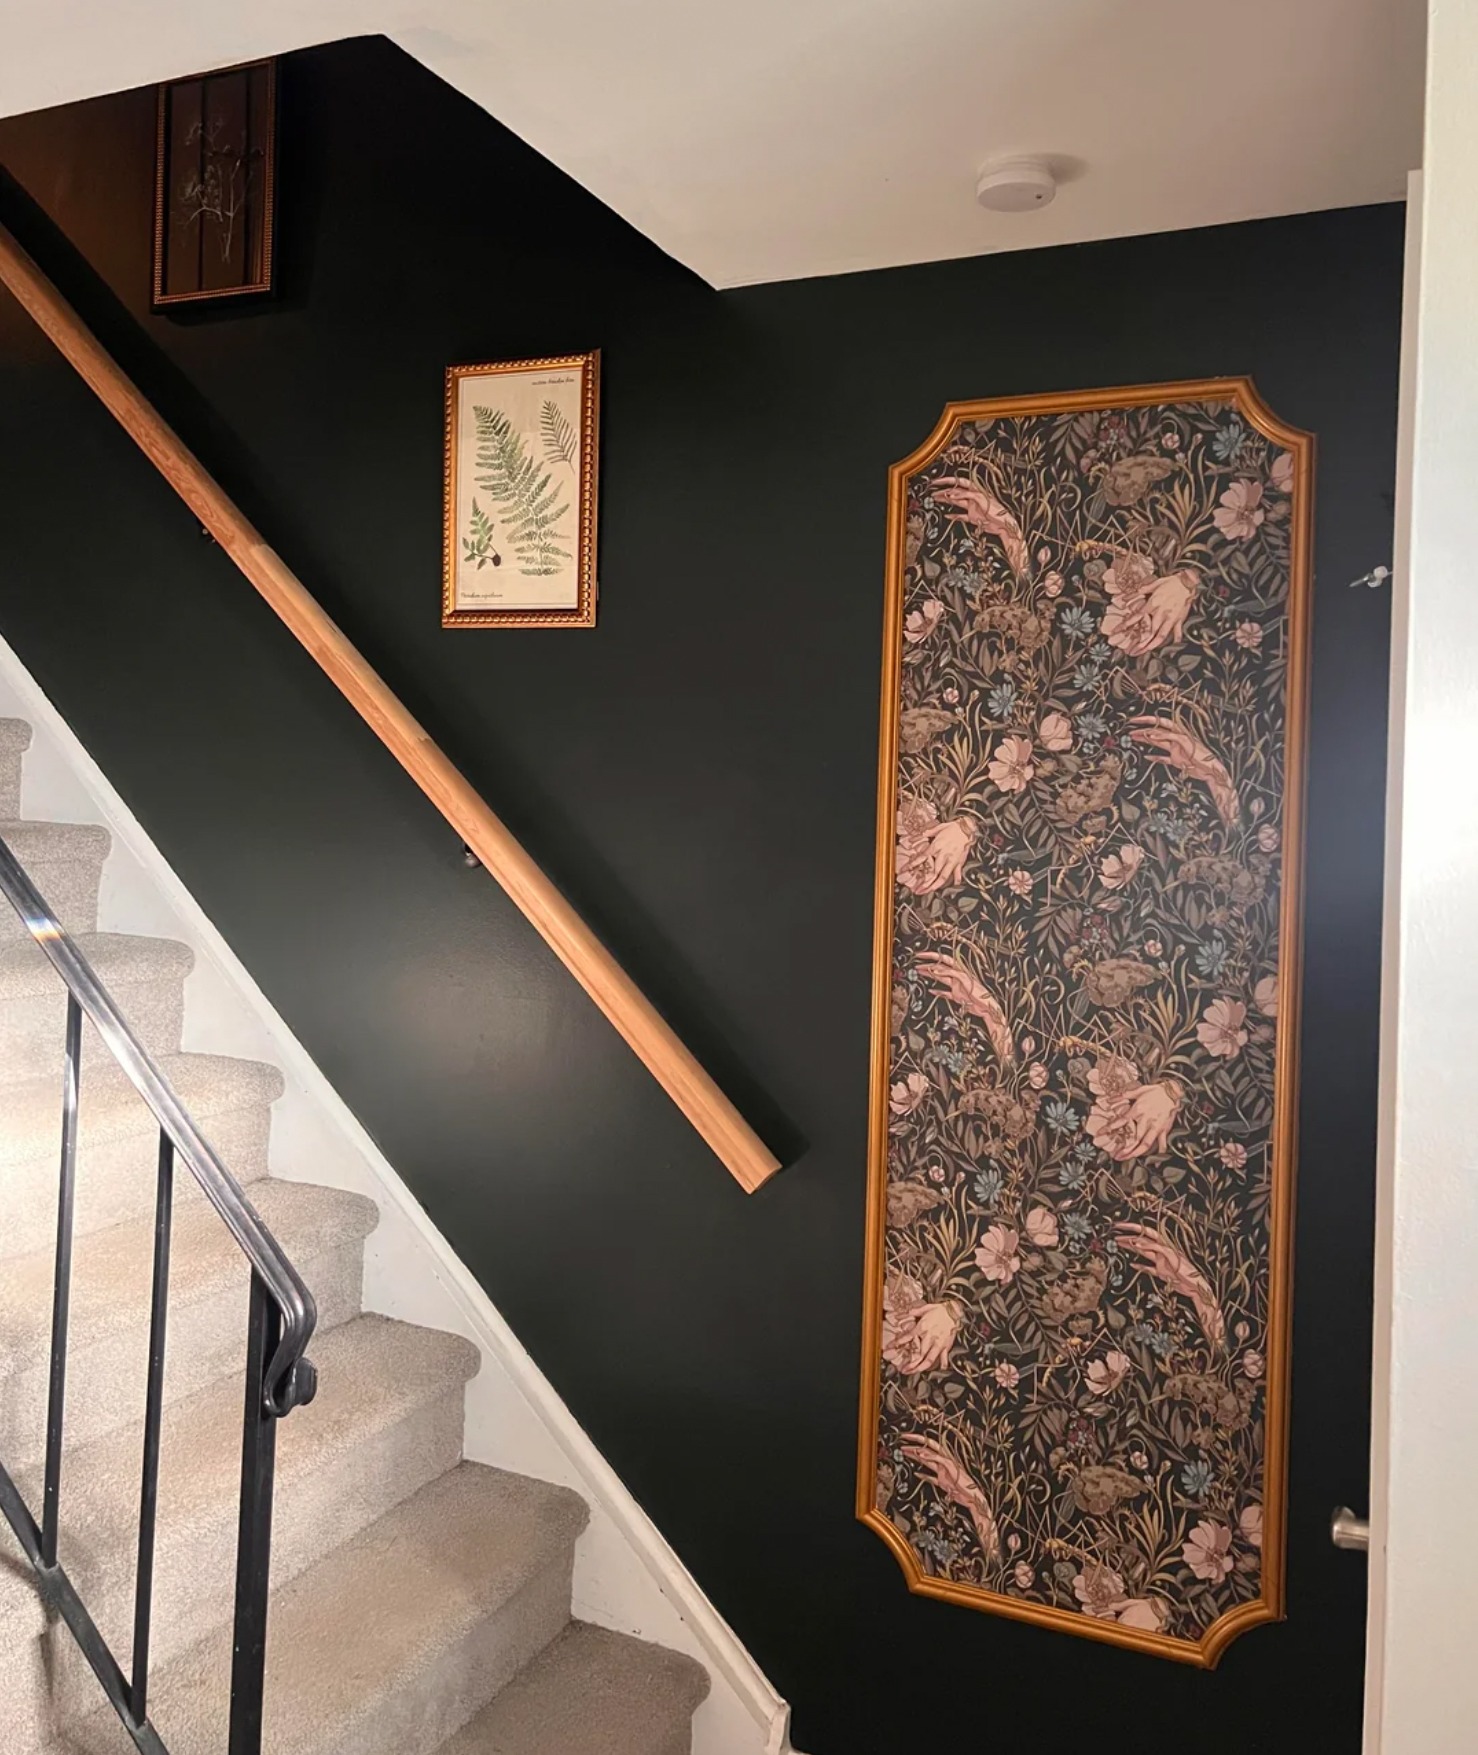 I transformed my stairway with my DIY framed murals – they were super simple to make, all you need are wallpaper & caulk